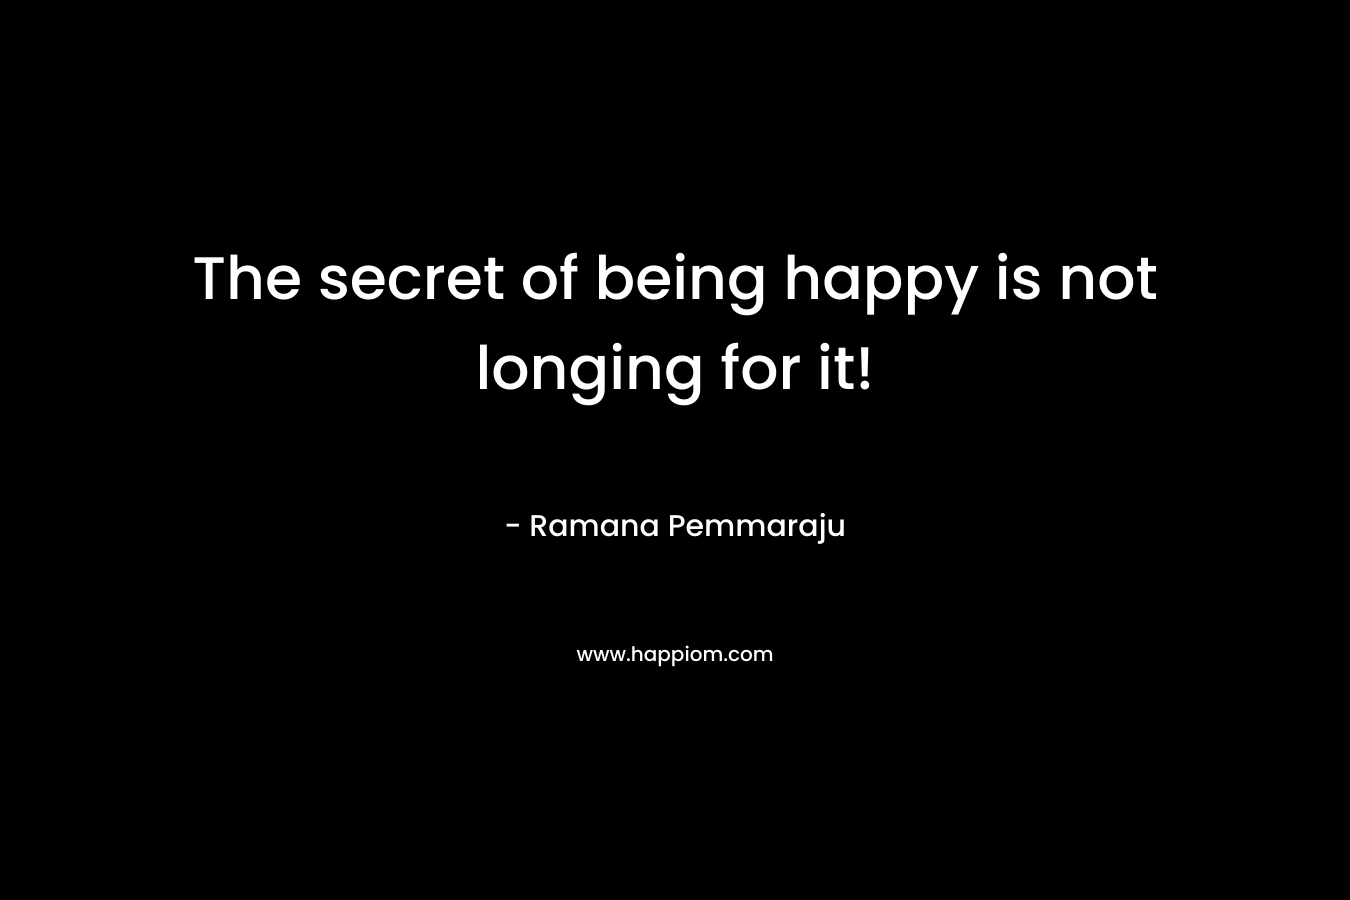 The secret of being happy is not longing for it! – Ramana Pemmaraju